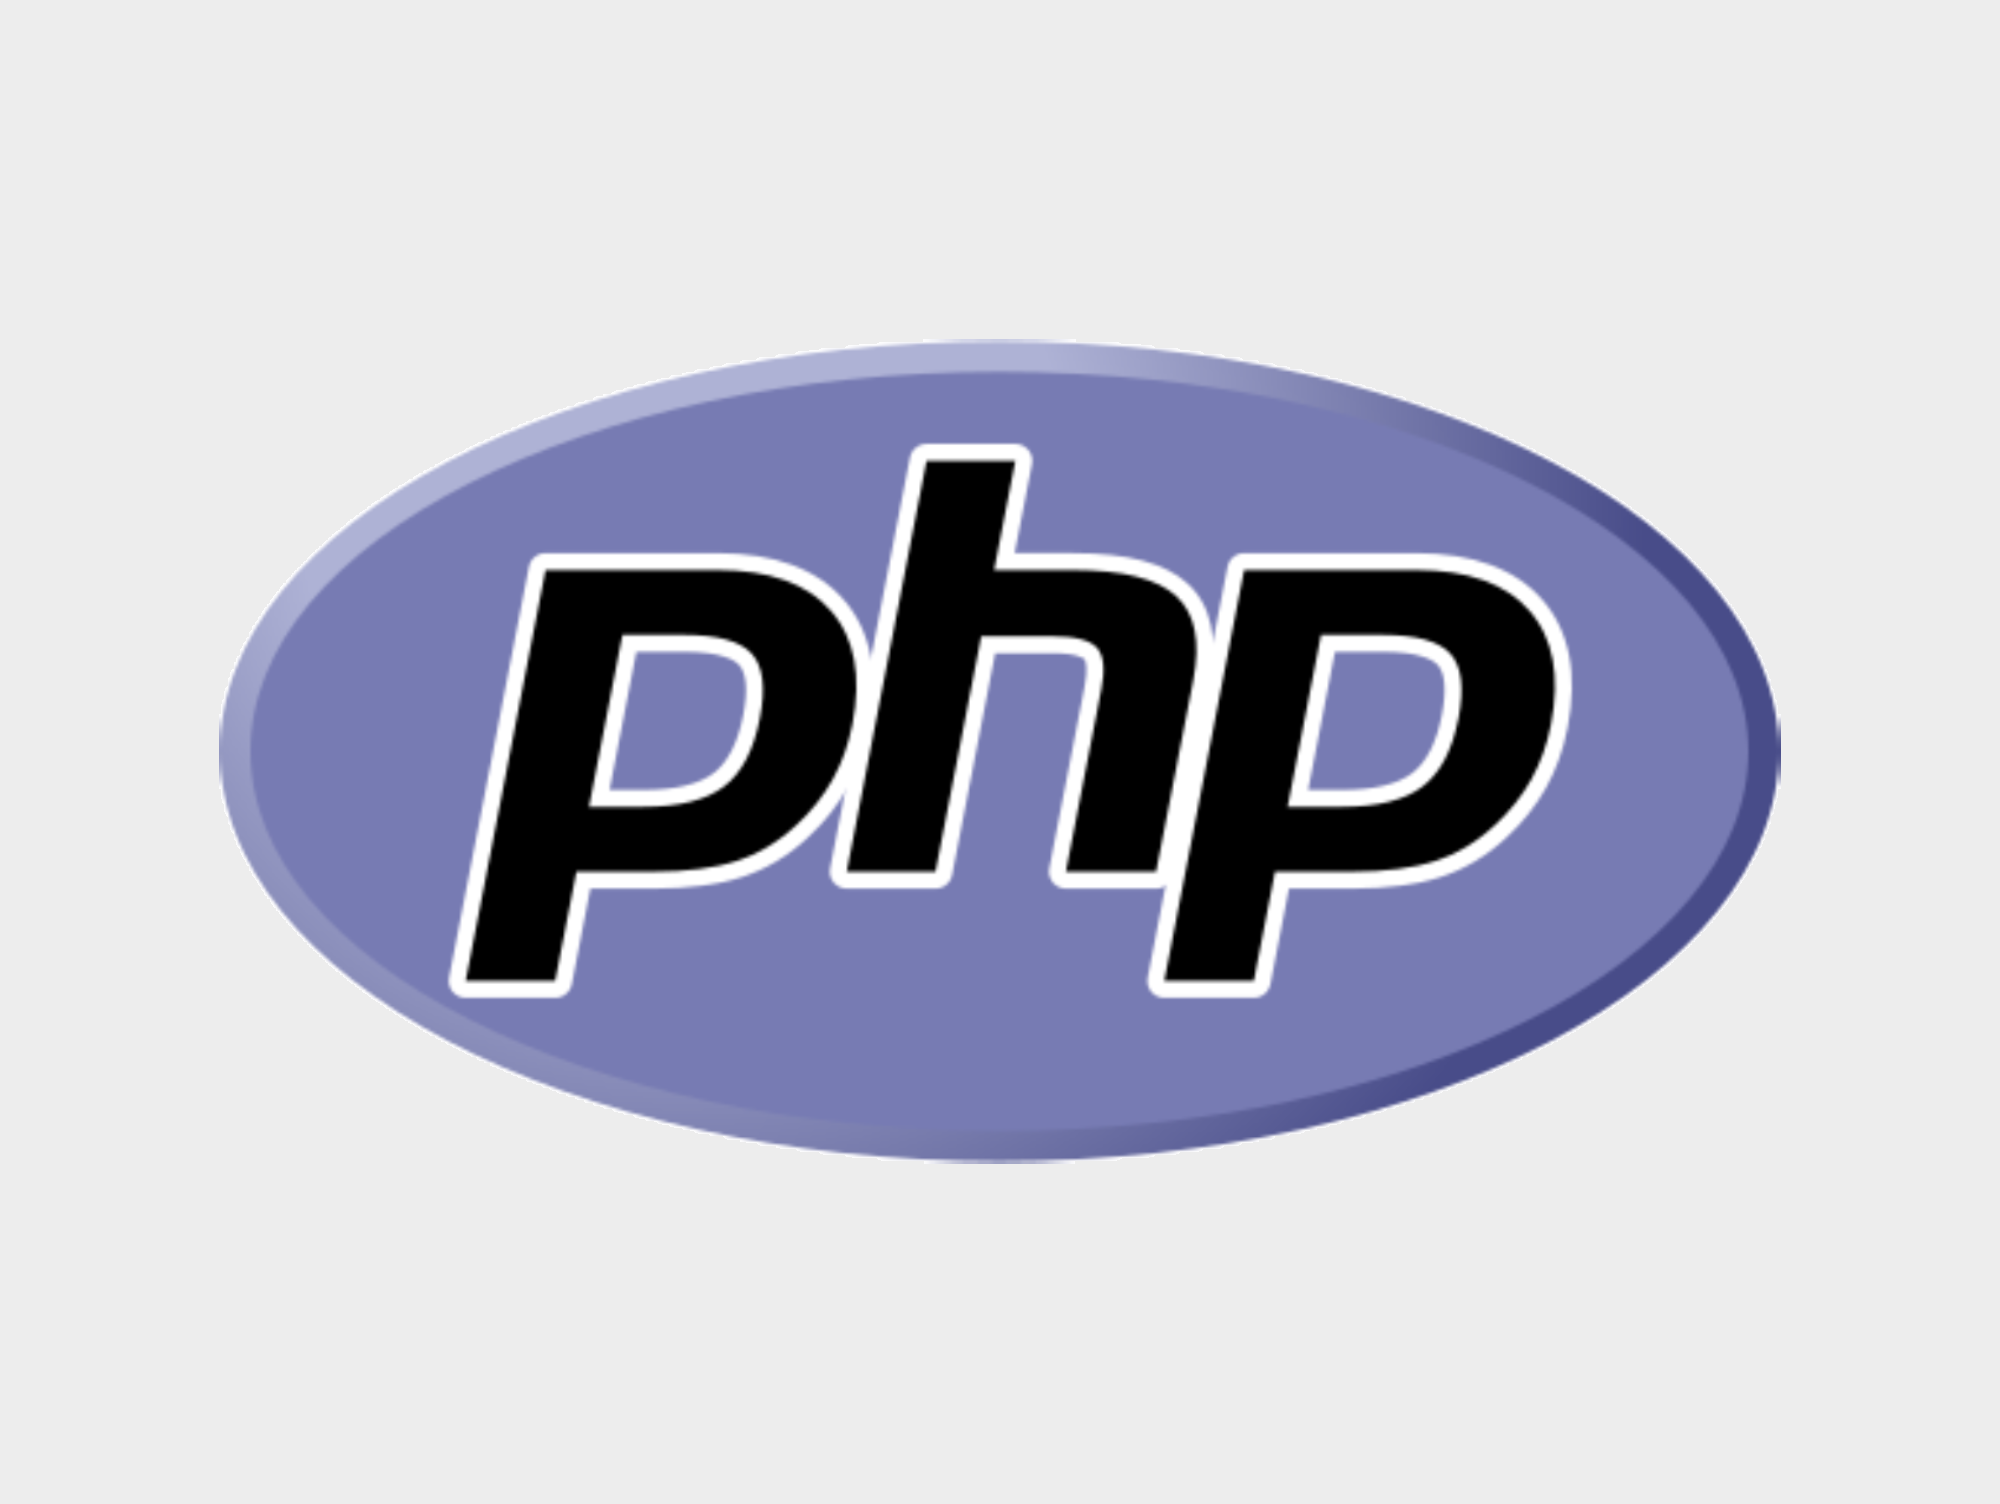 php1